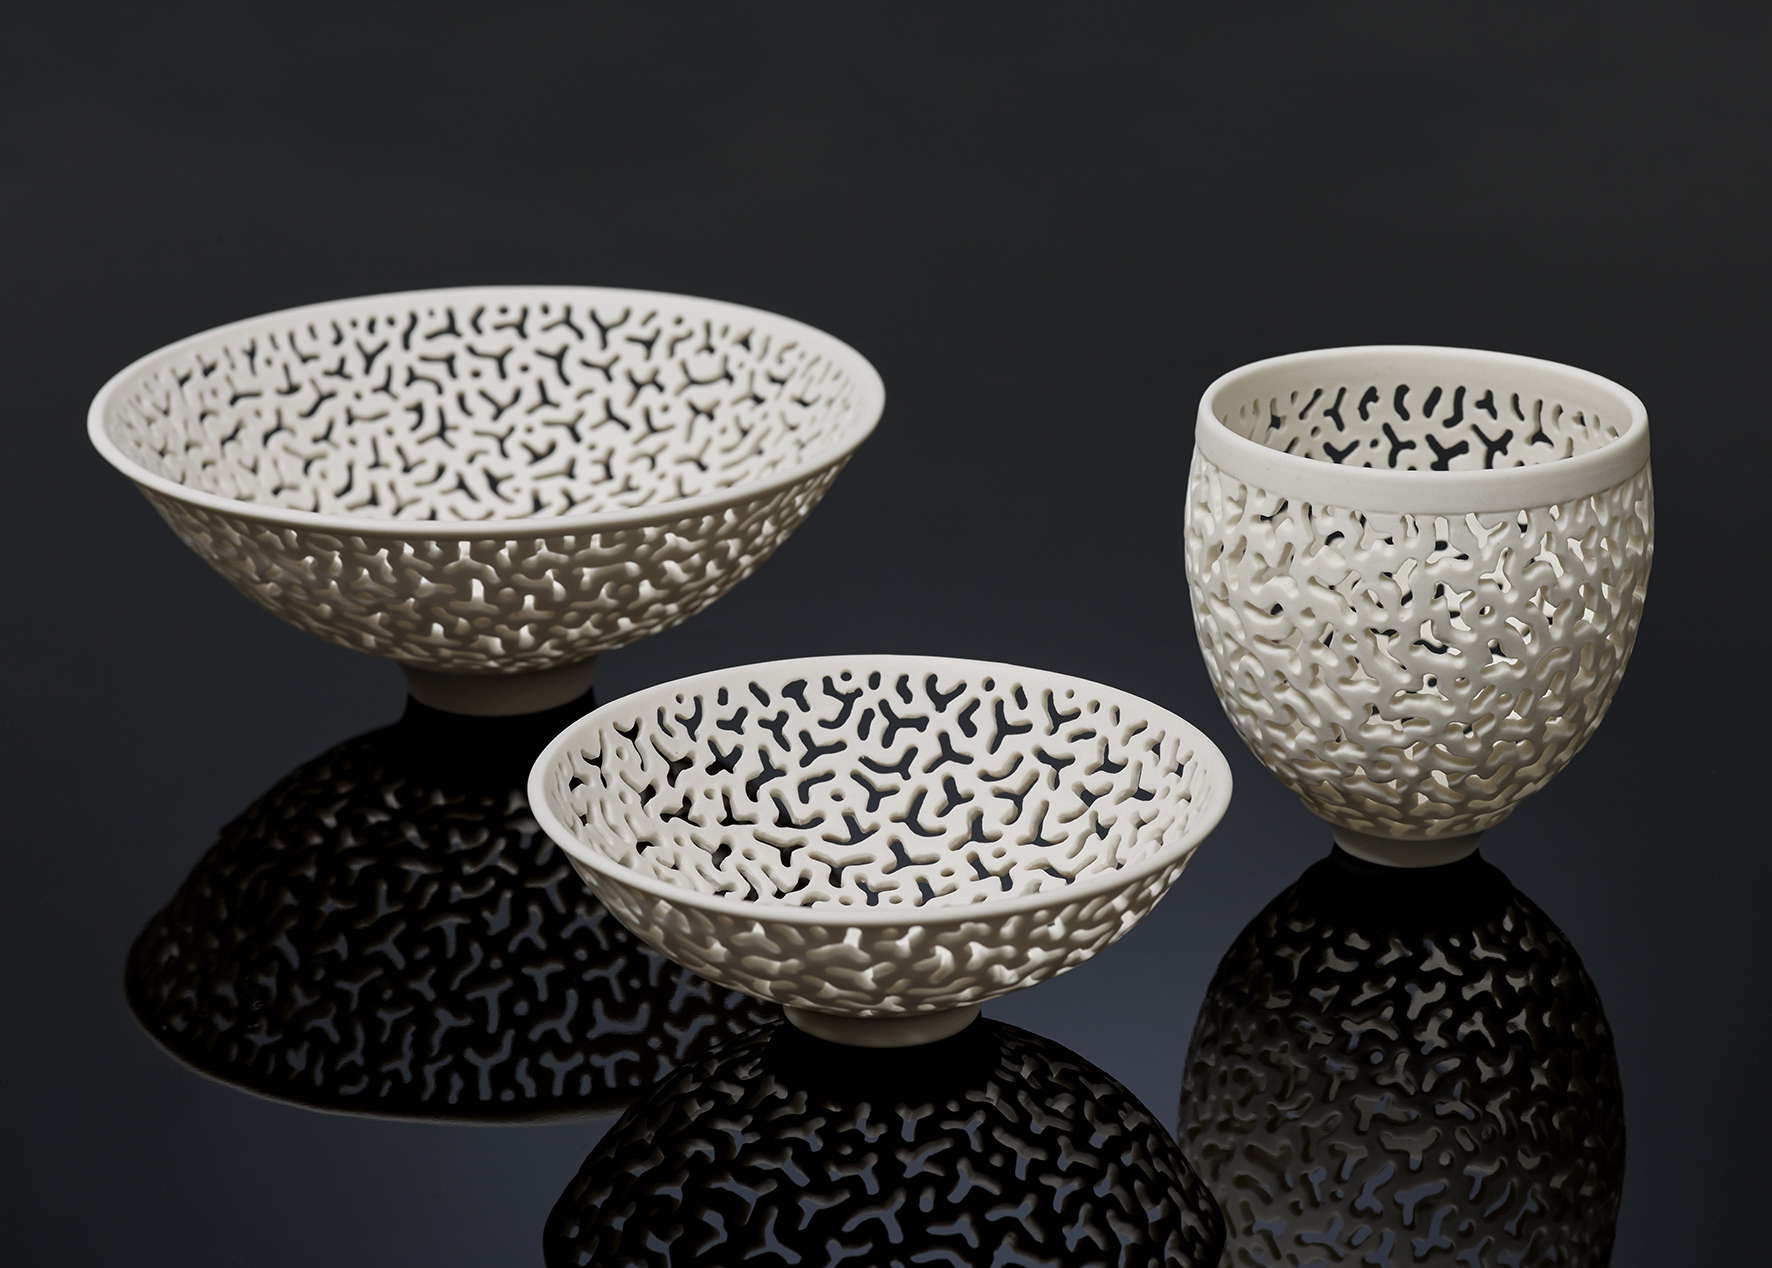 Sandra Black, 3 Etched Bowls, thrown and pieced cool ice porcelain, various sizes. Photograph: Victor France